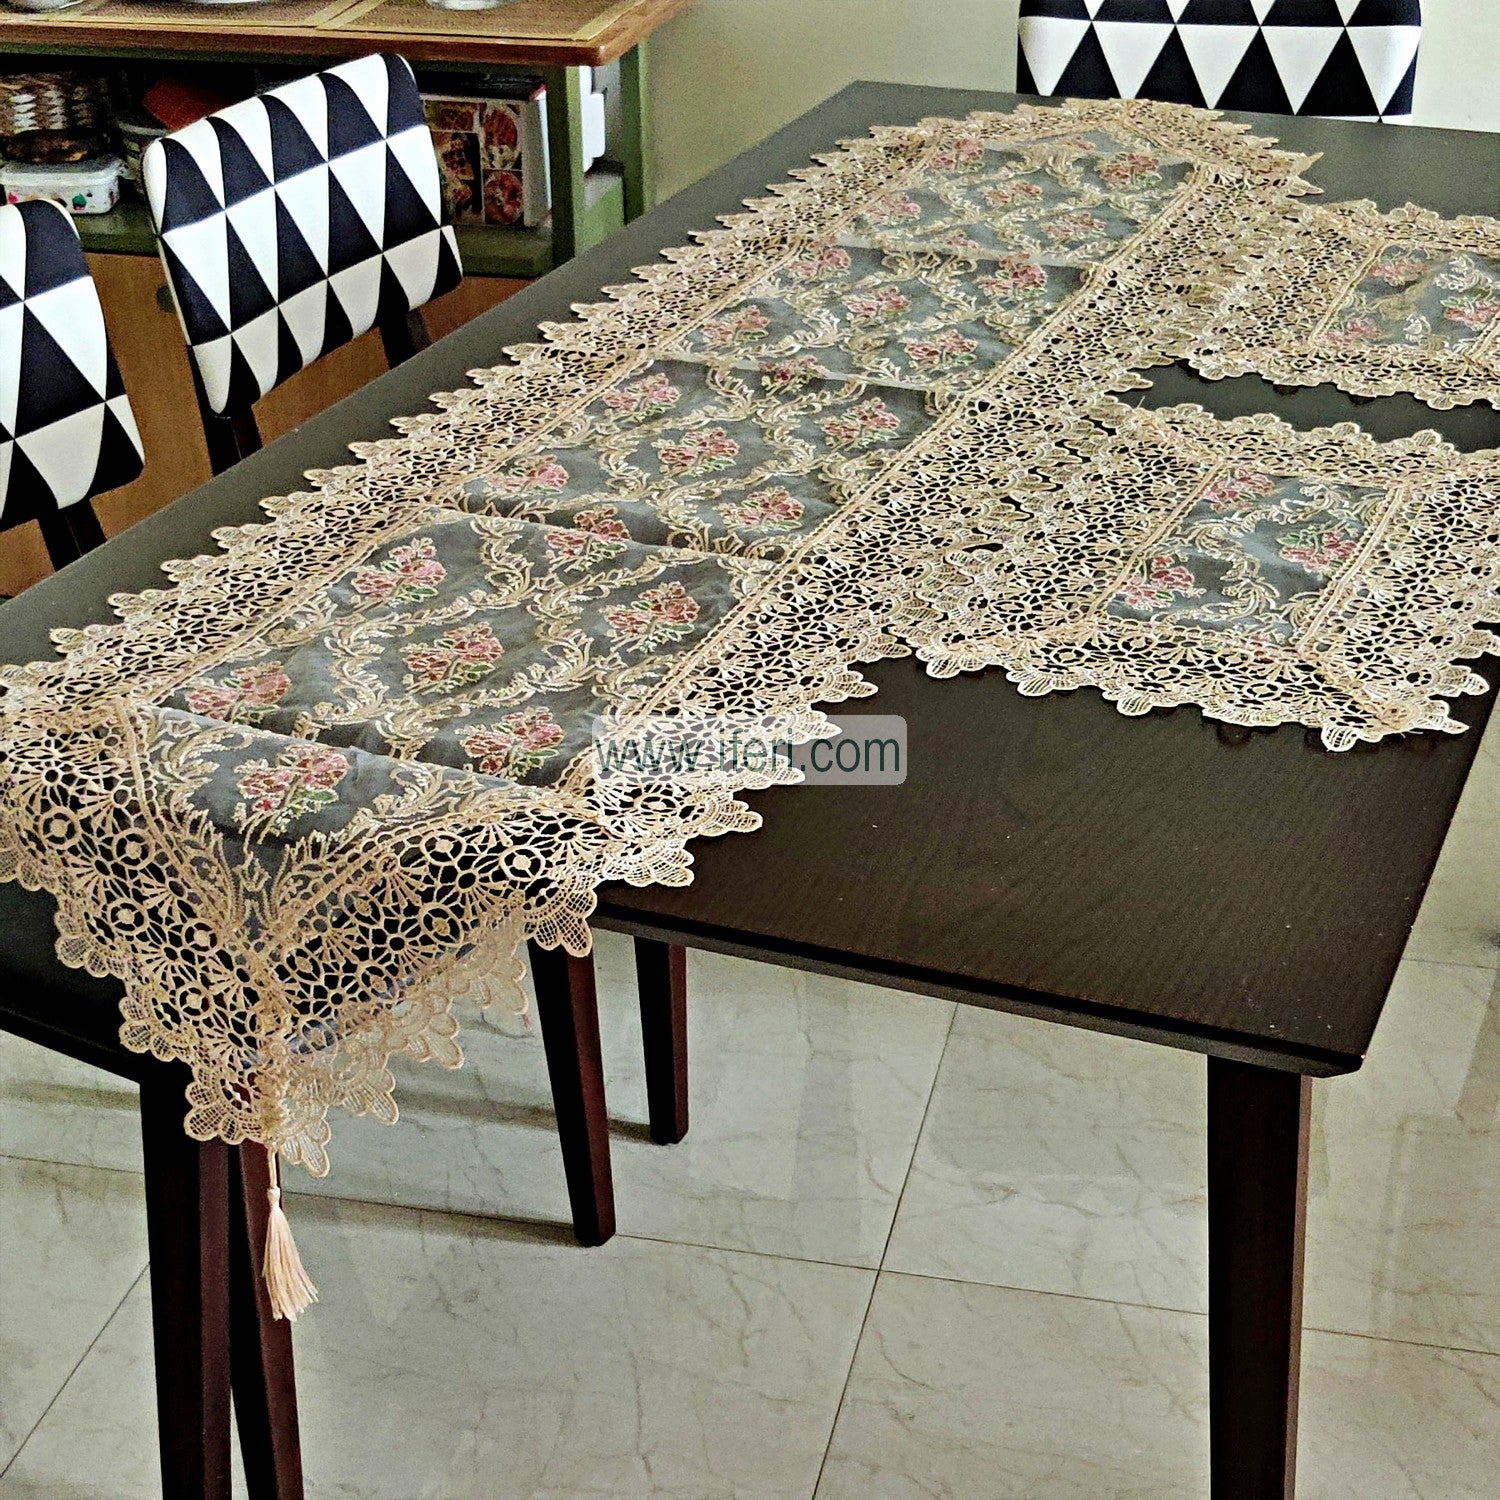 7pcs Luxury Embroidered Lace Runner & Placemats Set RJ3594